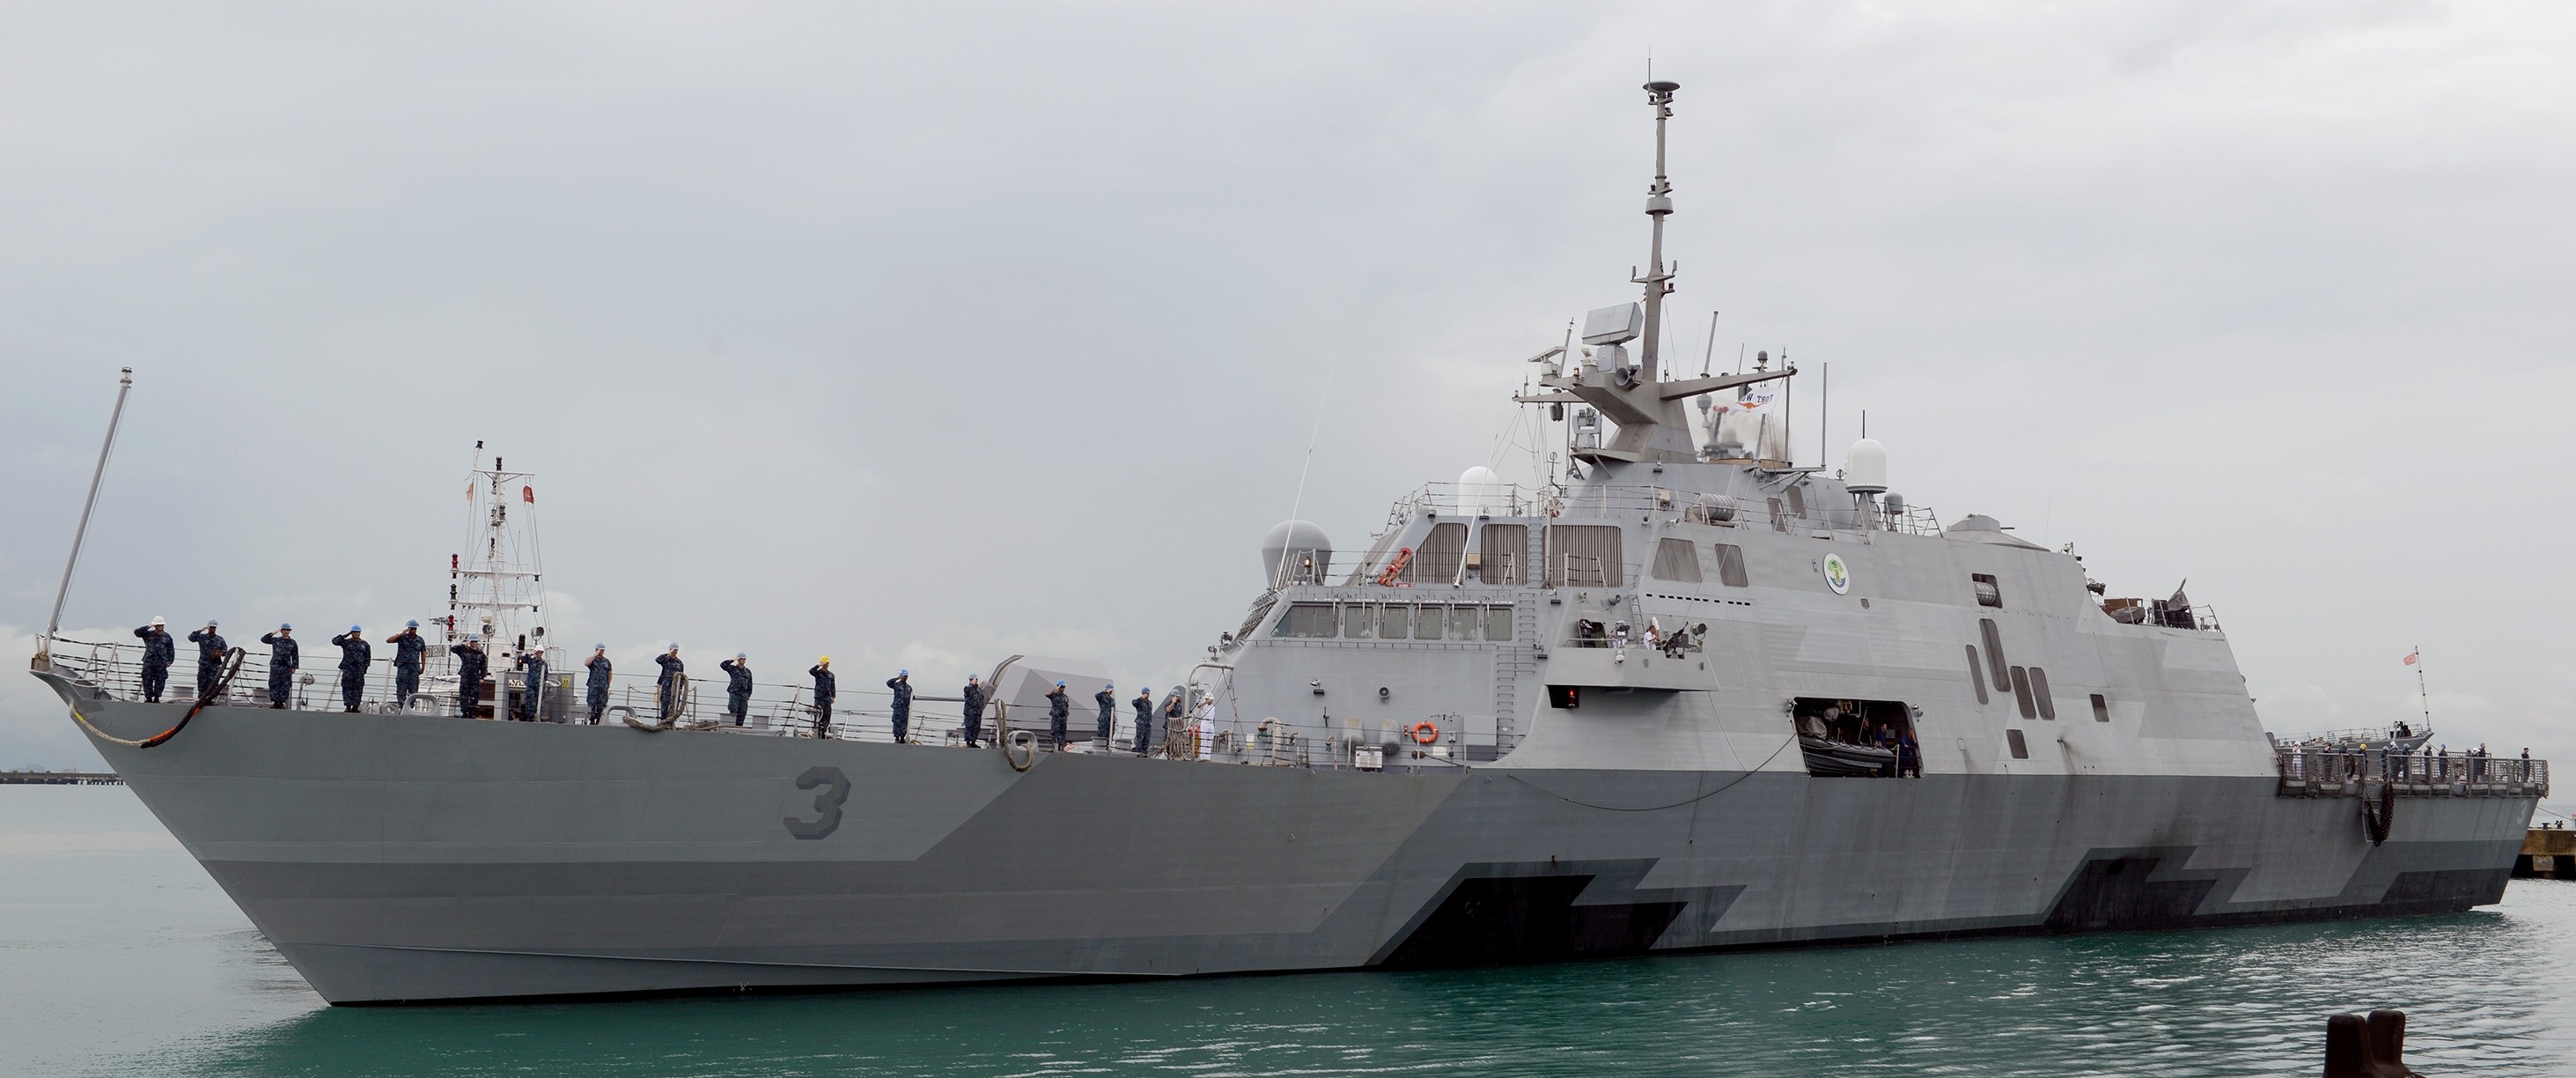 lcs-3 uss fort worth littoral combat ship freedom class us navy 74